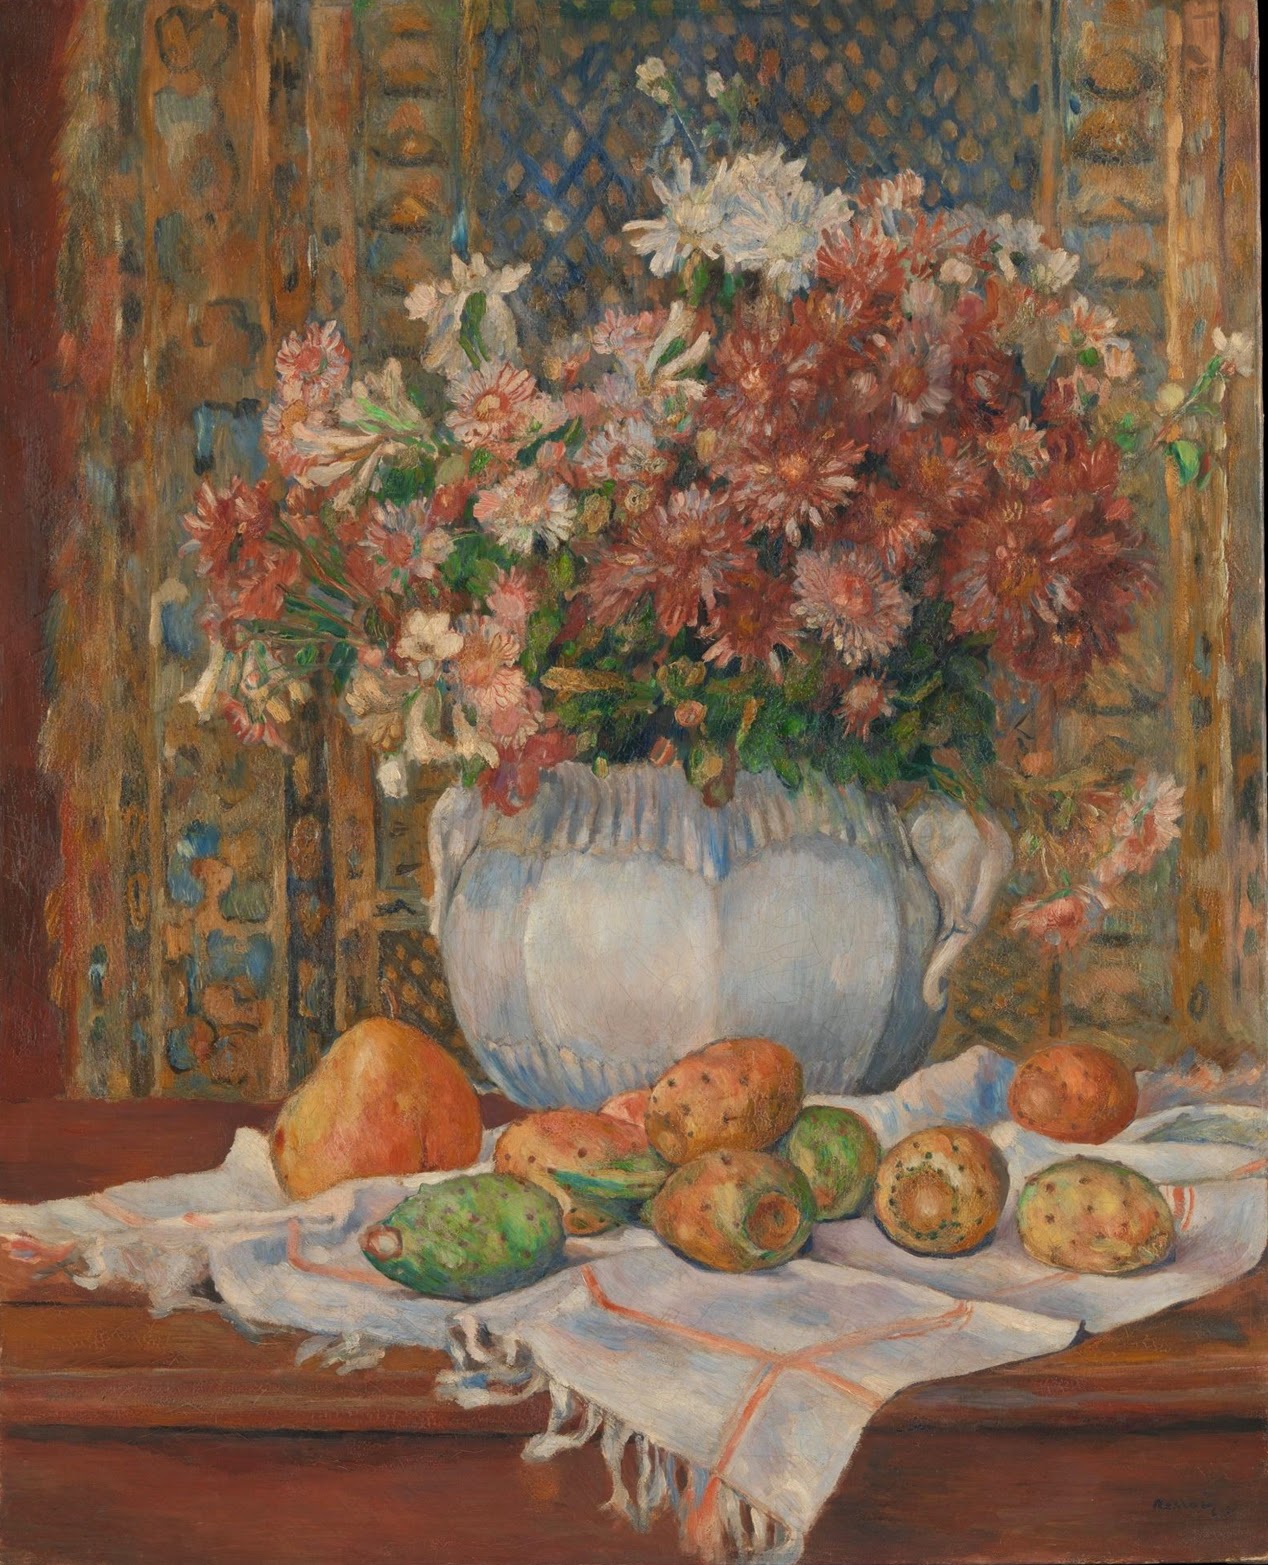 Pierre+Auguste+Renoir+-+Still+life+with+flowers+and+prickly+pears,+1885